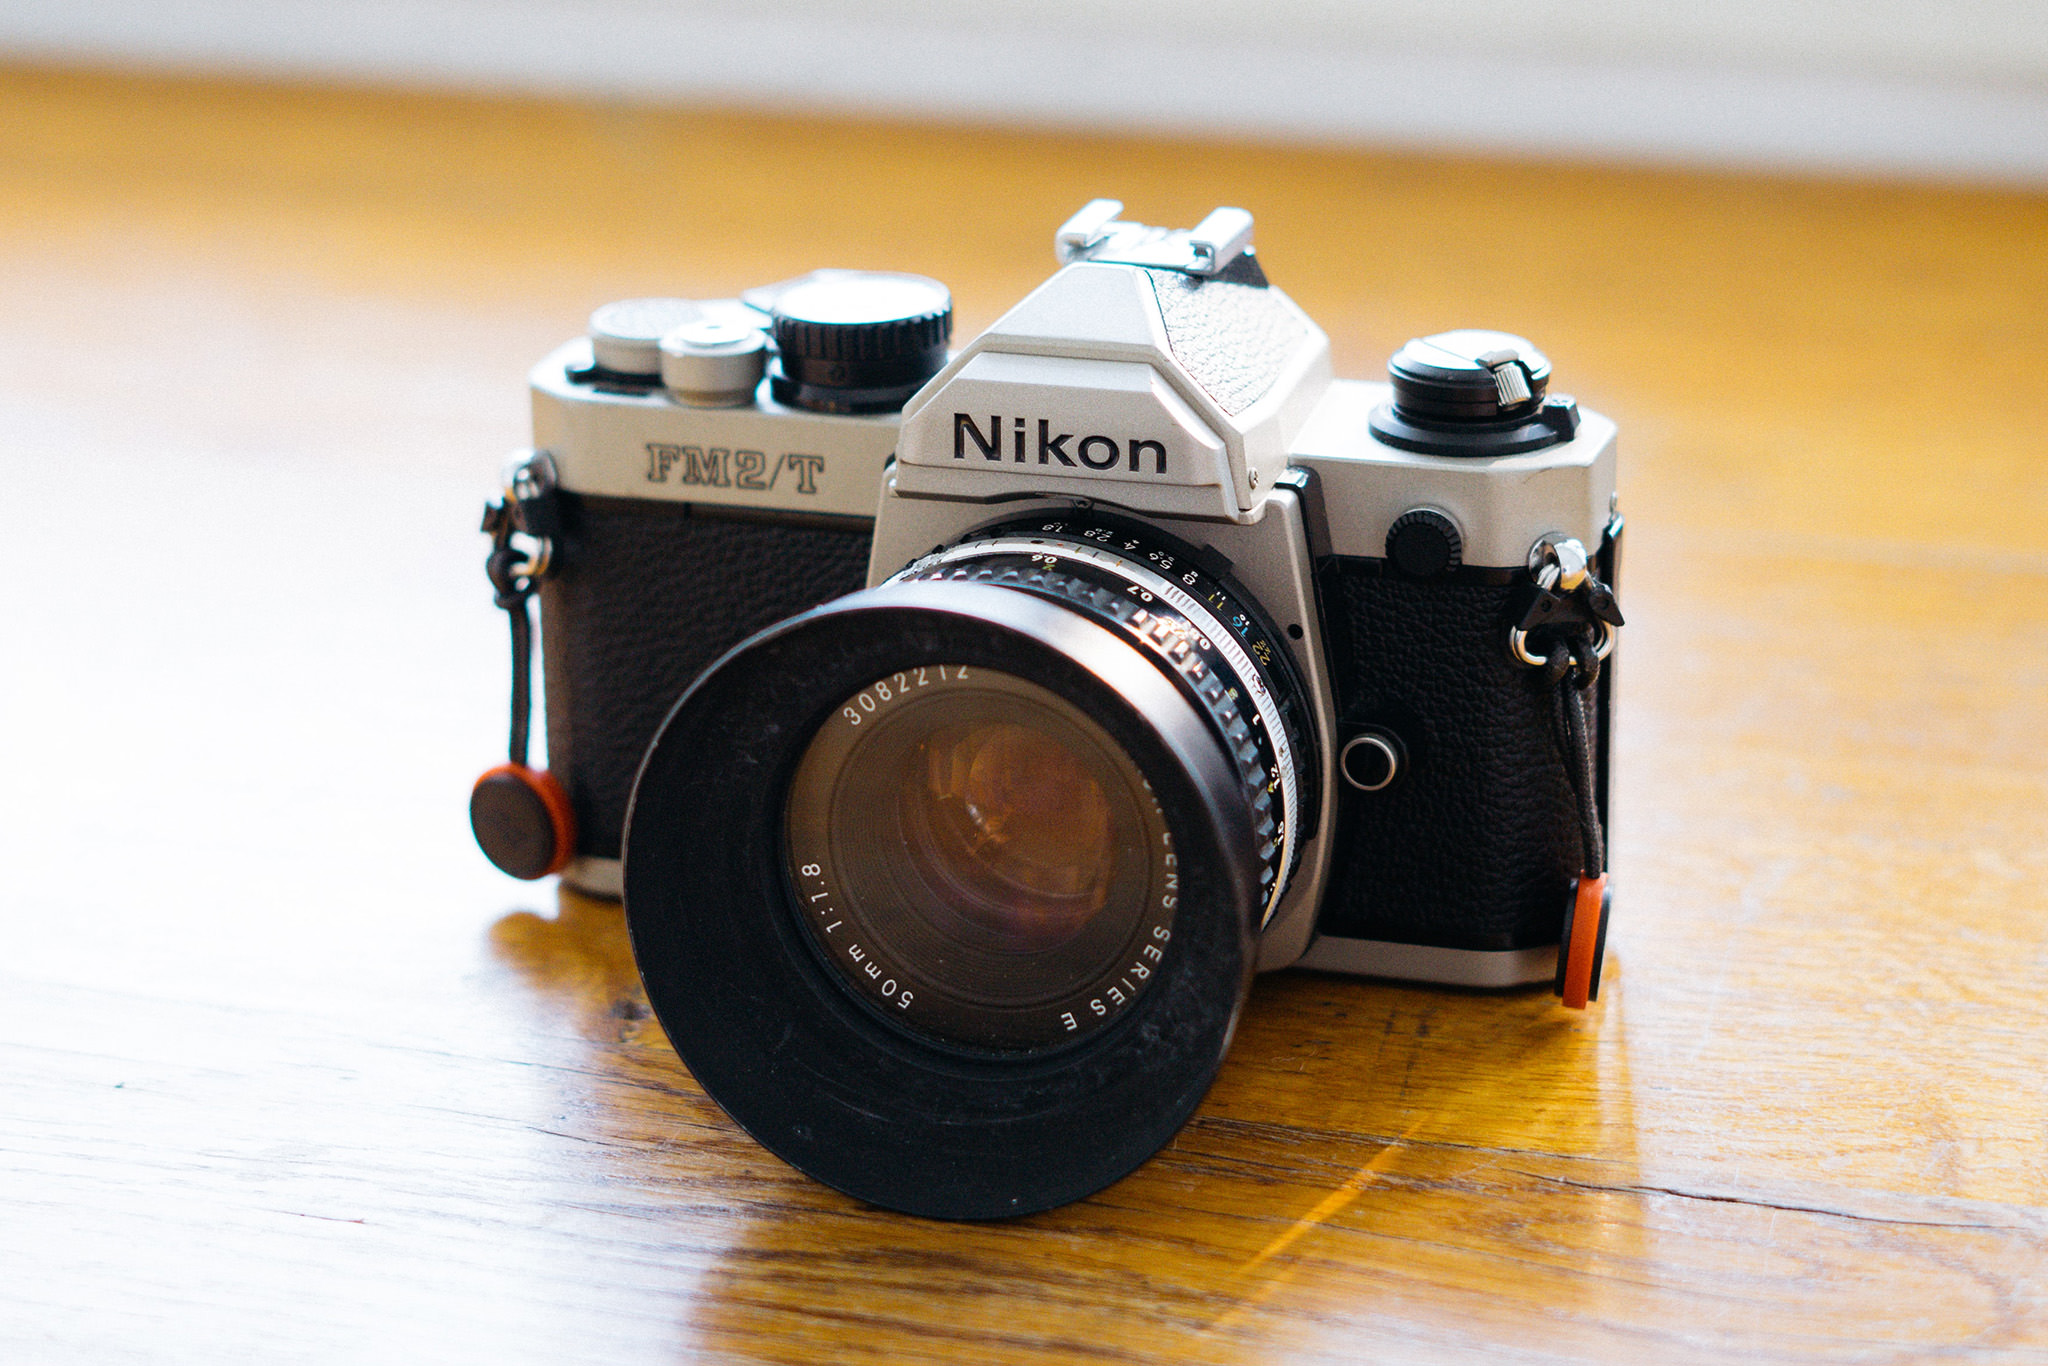 Nikon FM2/T - Info about Films, Battery and the camera